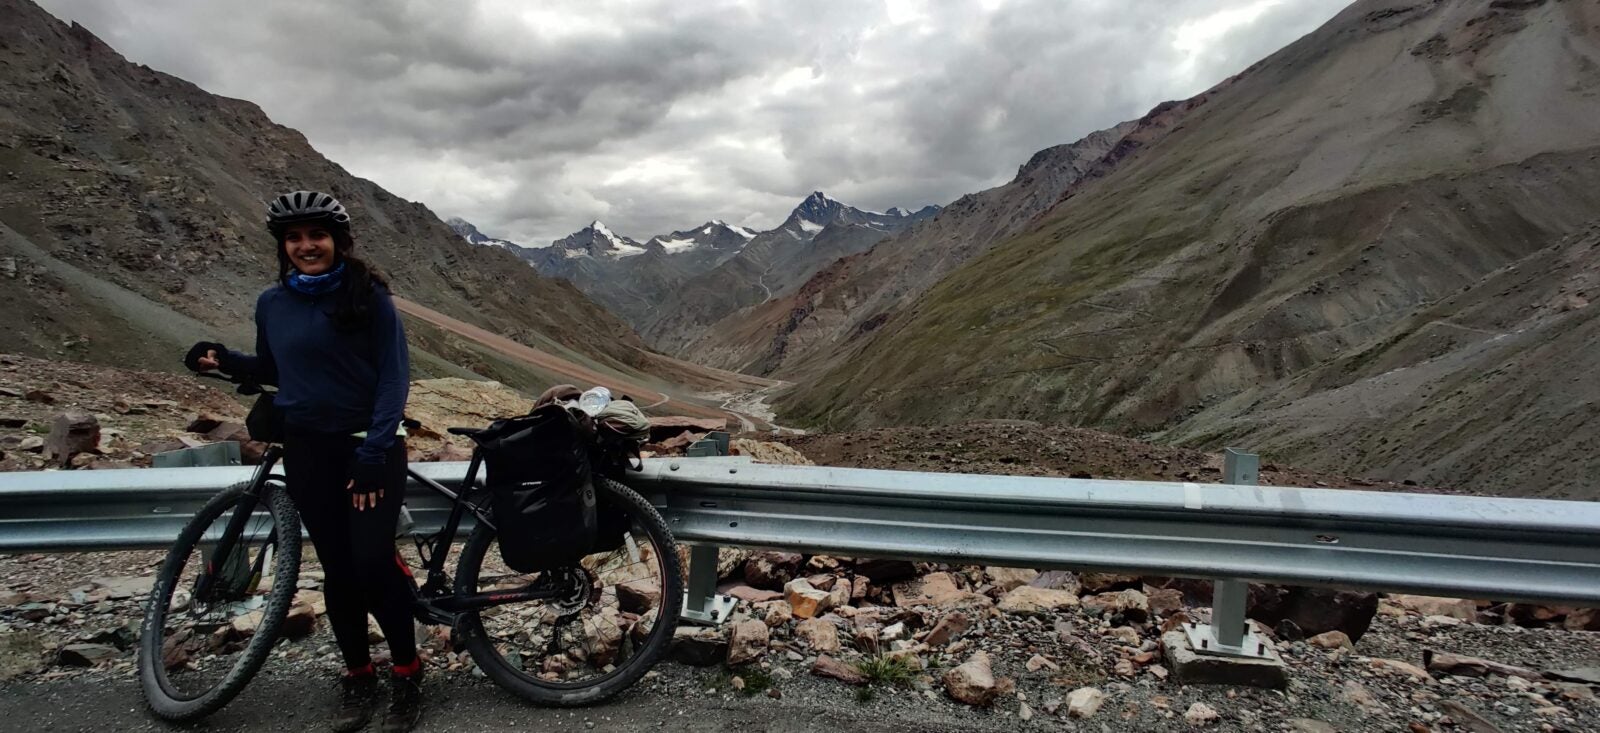 Pashmina standing next to her bicycle at the side of a road. Beyond her are mountains and a very cloudy sky.